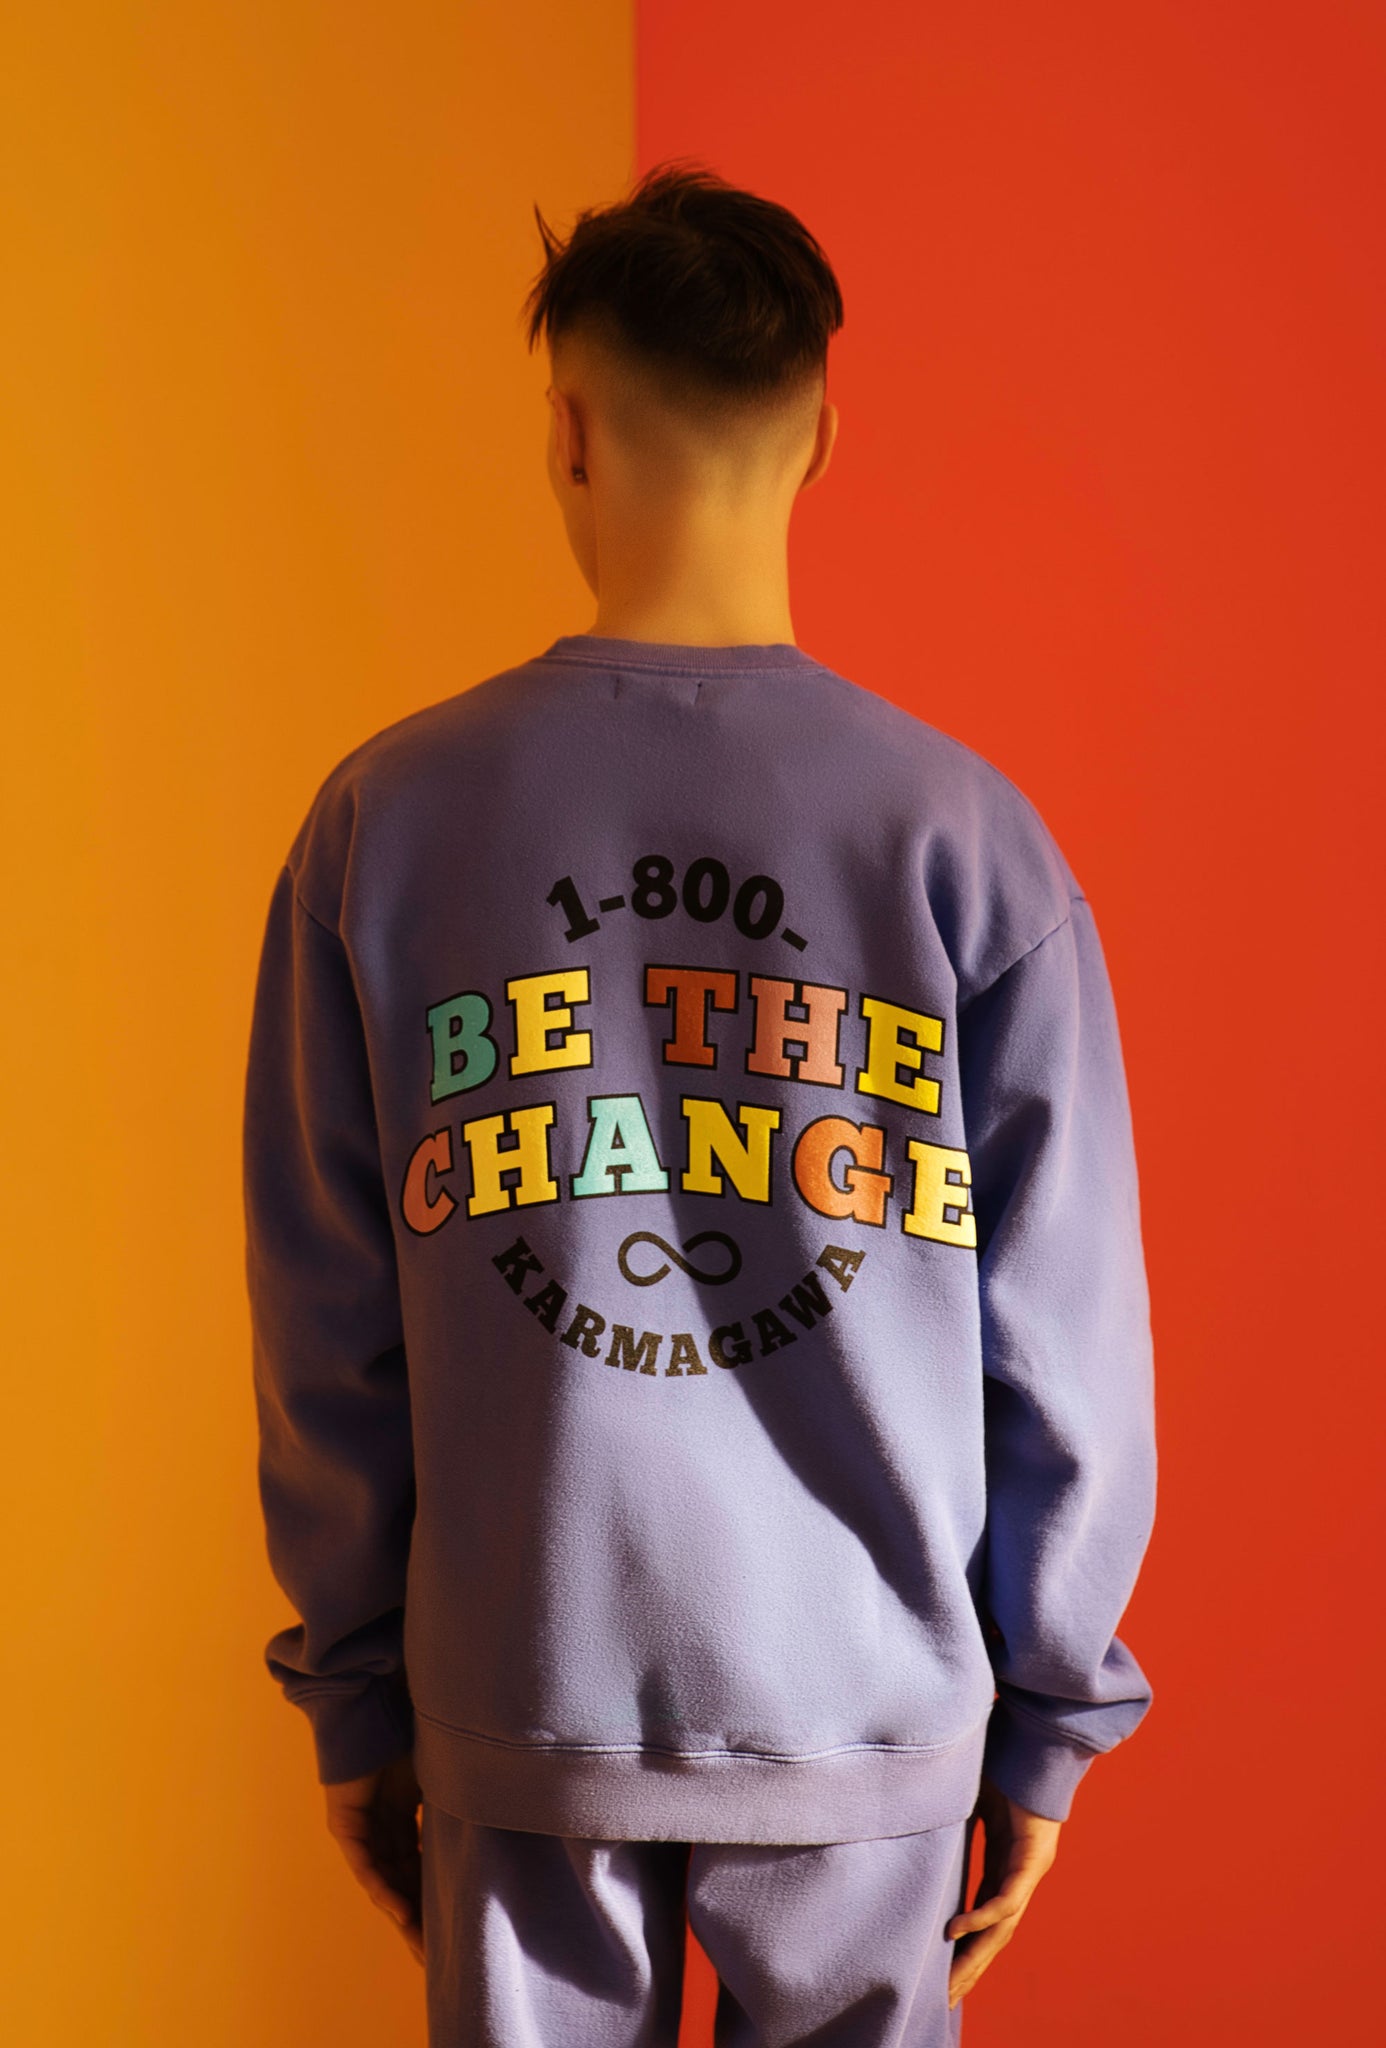 1-800-BE-THE-CHANGE Pullover